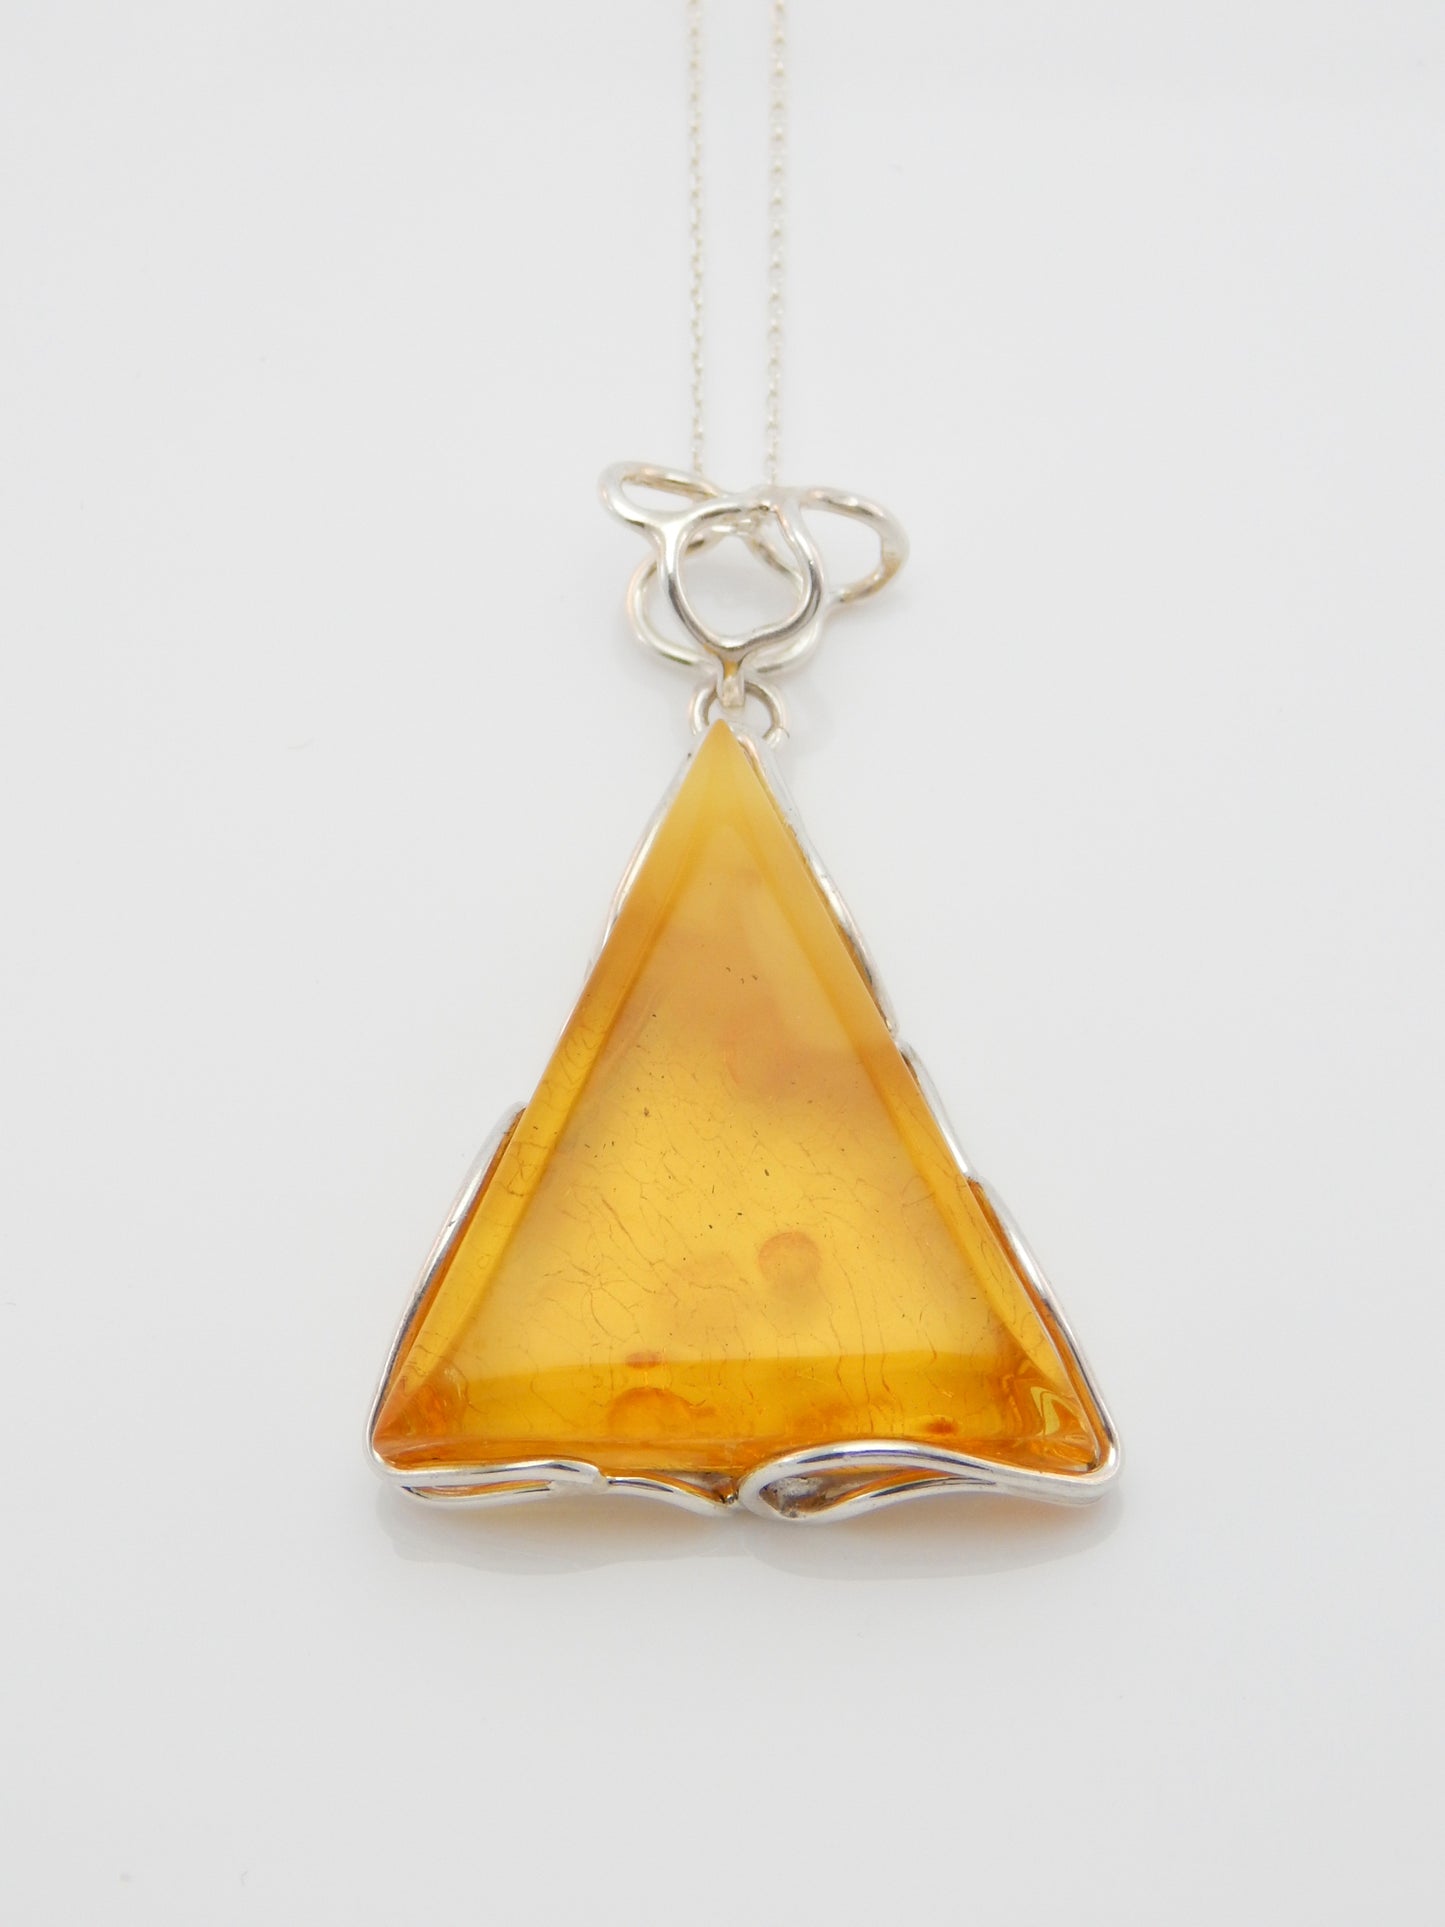 Handmade Natural Baltic Lemon Amber Triangular Pendant Necklace in 925 Sterling Silver